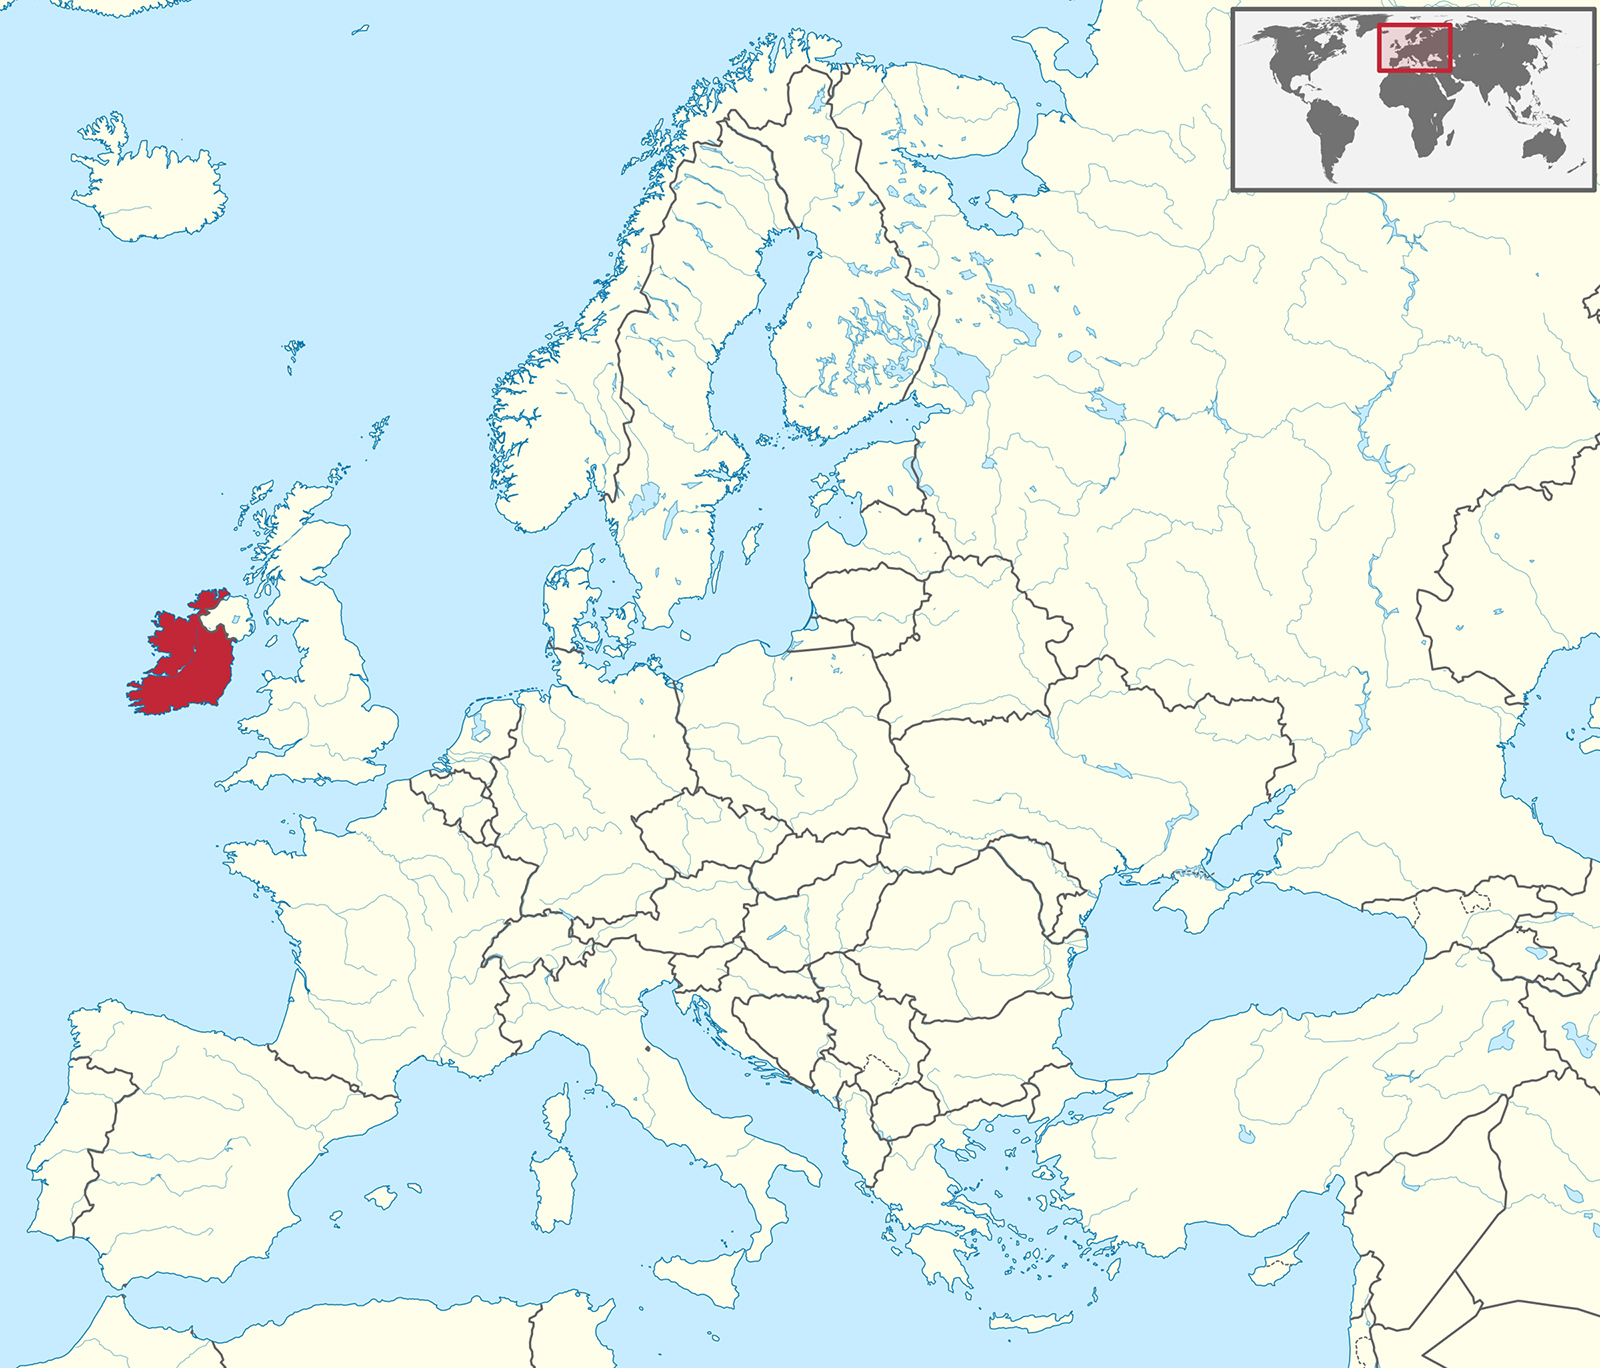 Ireland, red, in western Europe. (Image courtesy Wikipedia/Creative Commons)